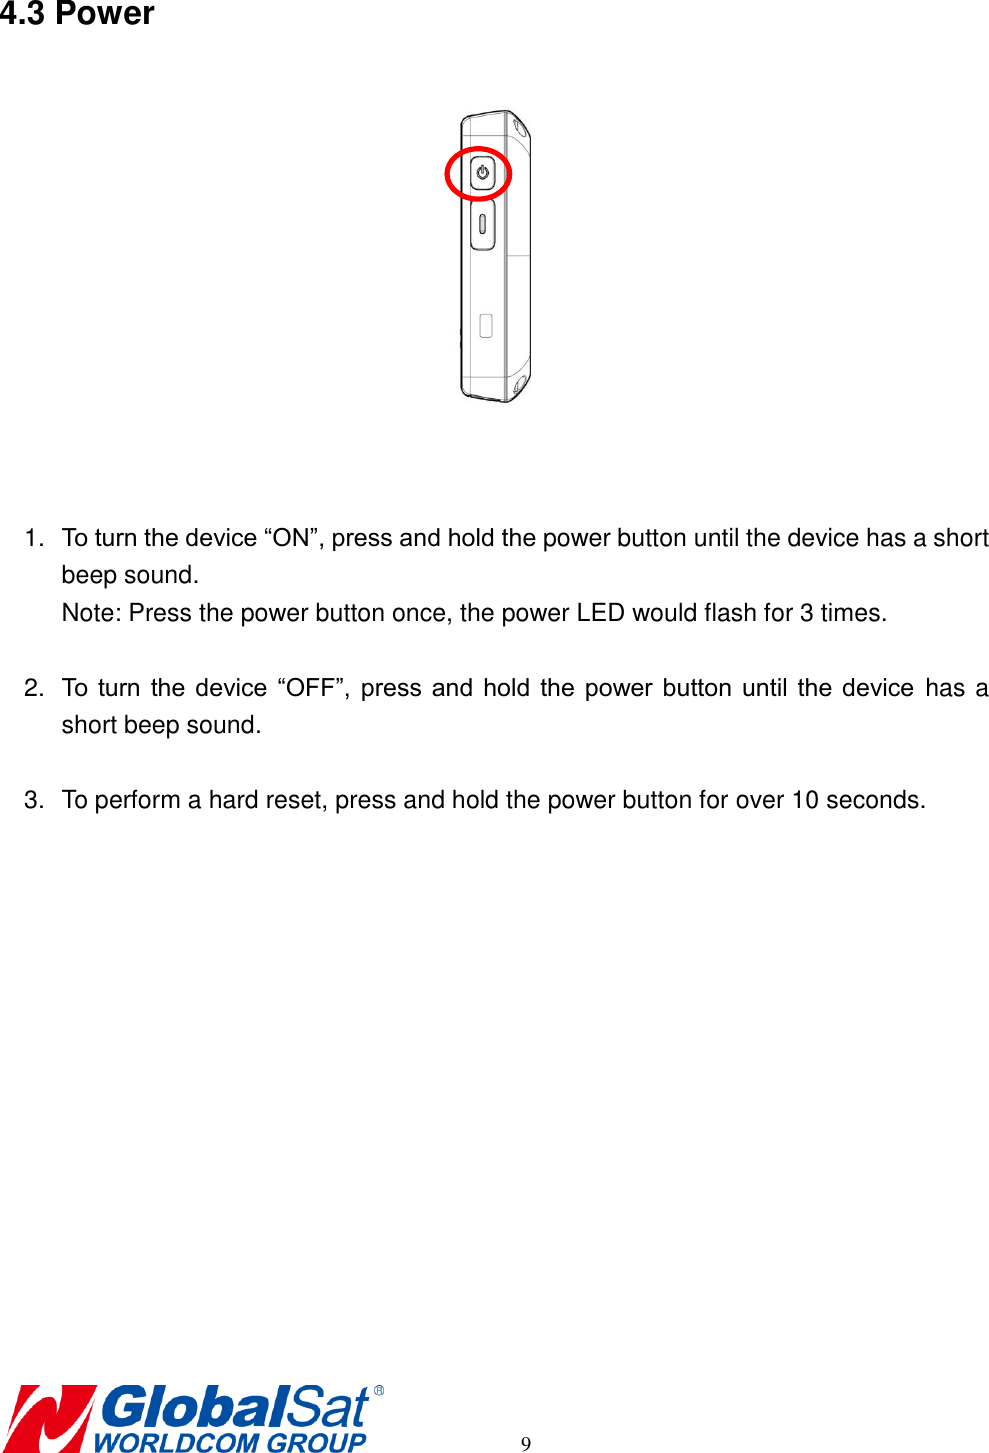       9 4.3 Power    1. To turn the device “ON”, press and hold the power button until the device has a short beep sound. Note: Press the power button once, the power LED would flash for 3 times.  2. To  turn  the  device “OFF”, press  and  hold the power button  until  the device  has a short beep sound.  3.  To perform a hard reset, press and hold the power button for over 10 seconds.     